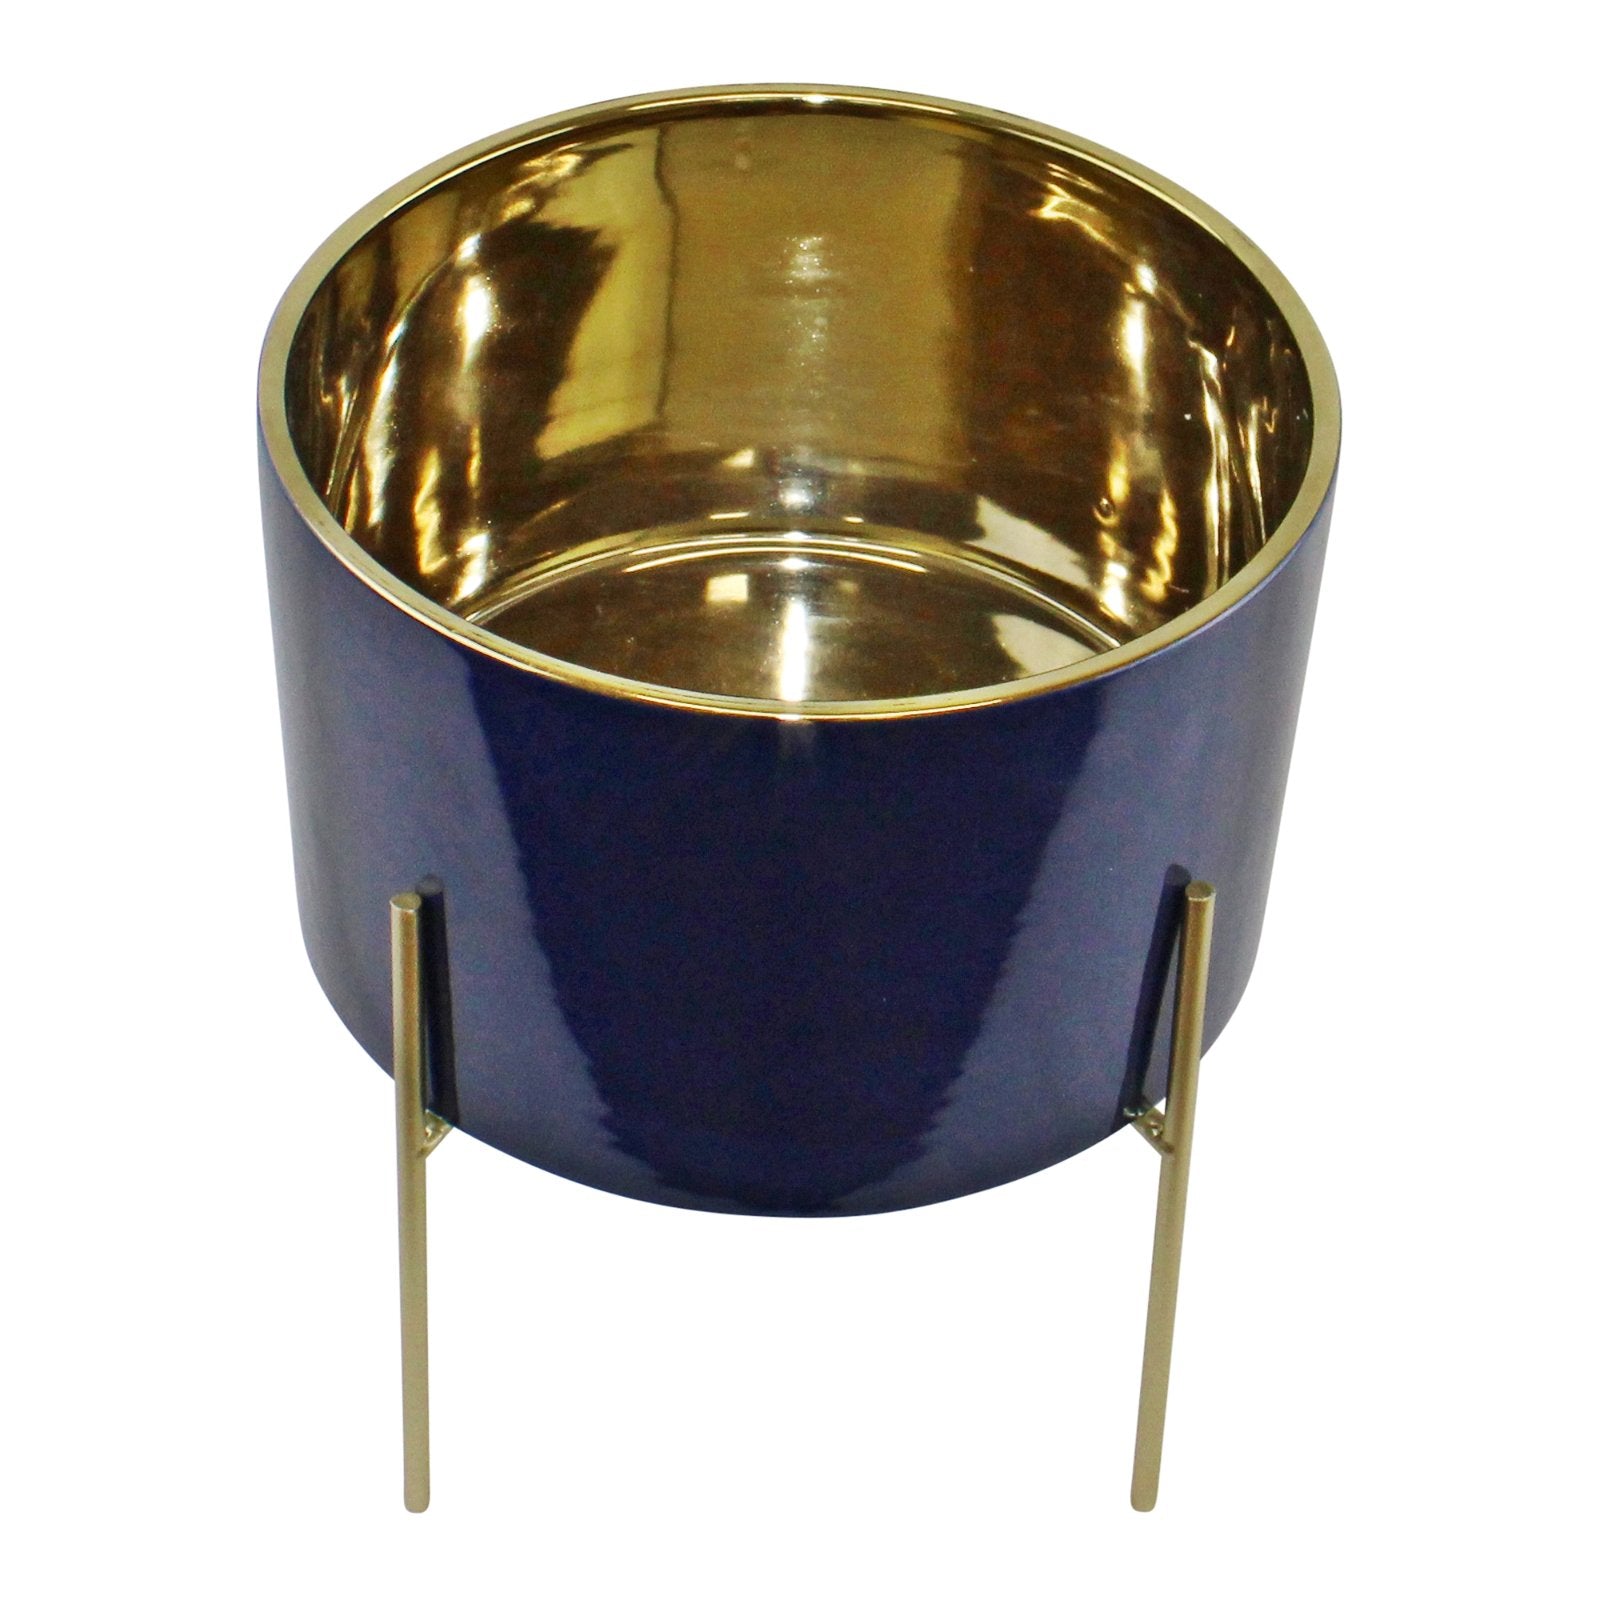 Large Ceramic Gold Lined Planter With Stand, Navy Blue